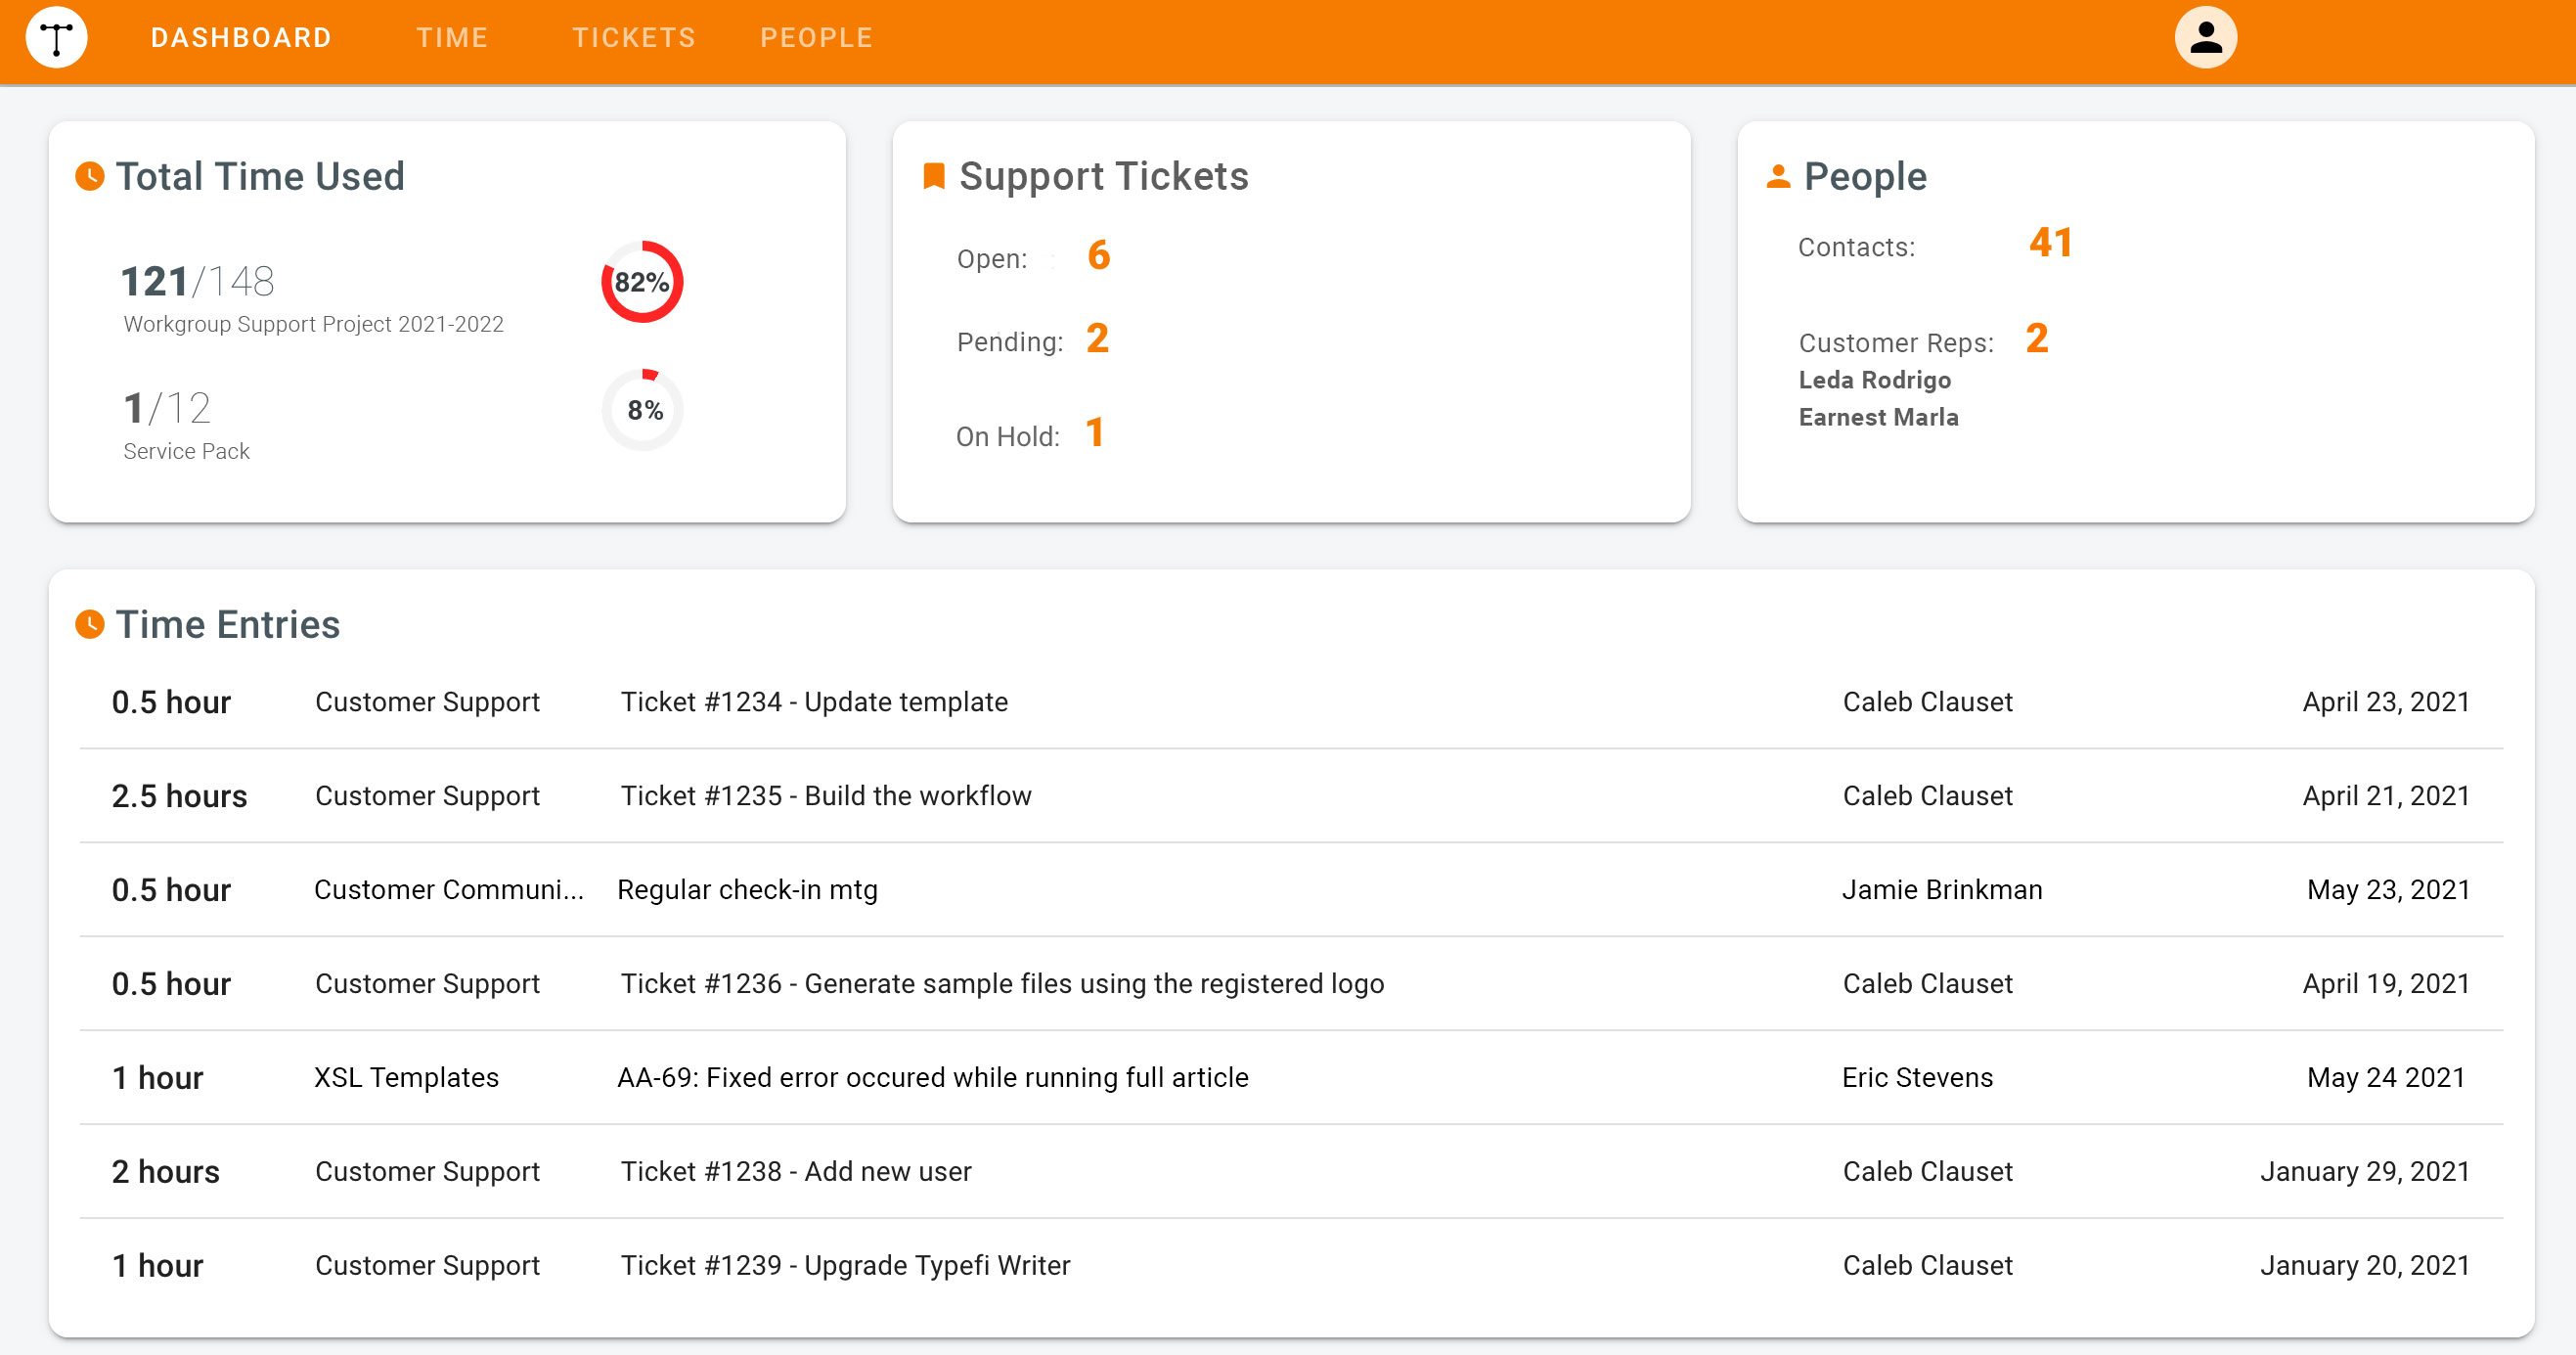 A screenshot of the My Typefi dashboard for Typefi. This screen shows the total time used, current support tickets and people, broken down by the number of Typefi Contacts and Customer Reps.